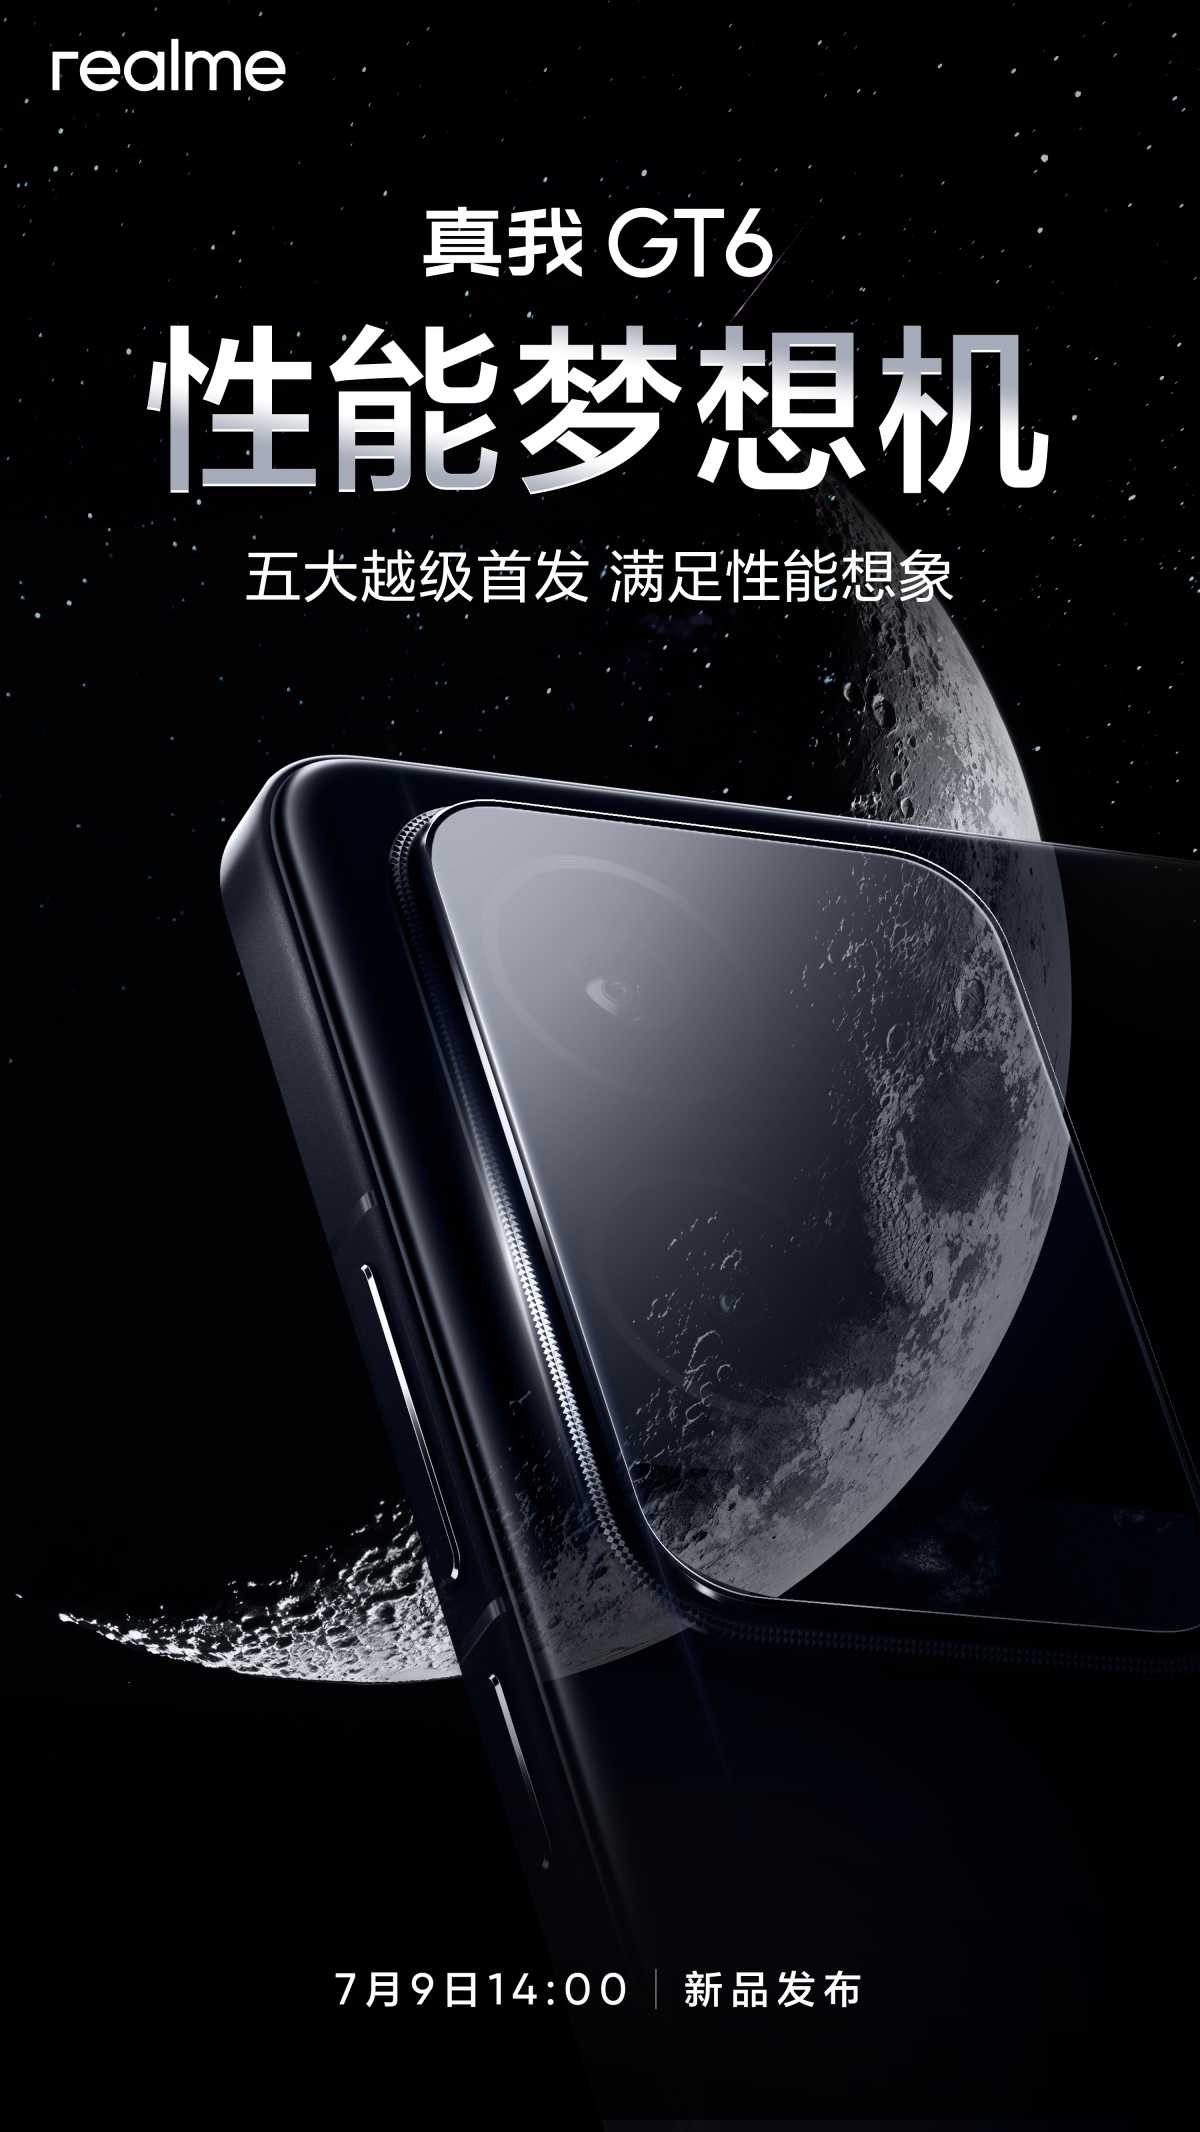 Realme GT6 for China launch gets scheduled for next week